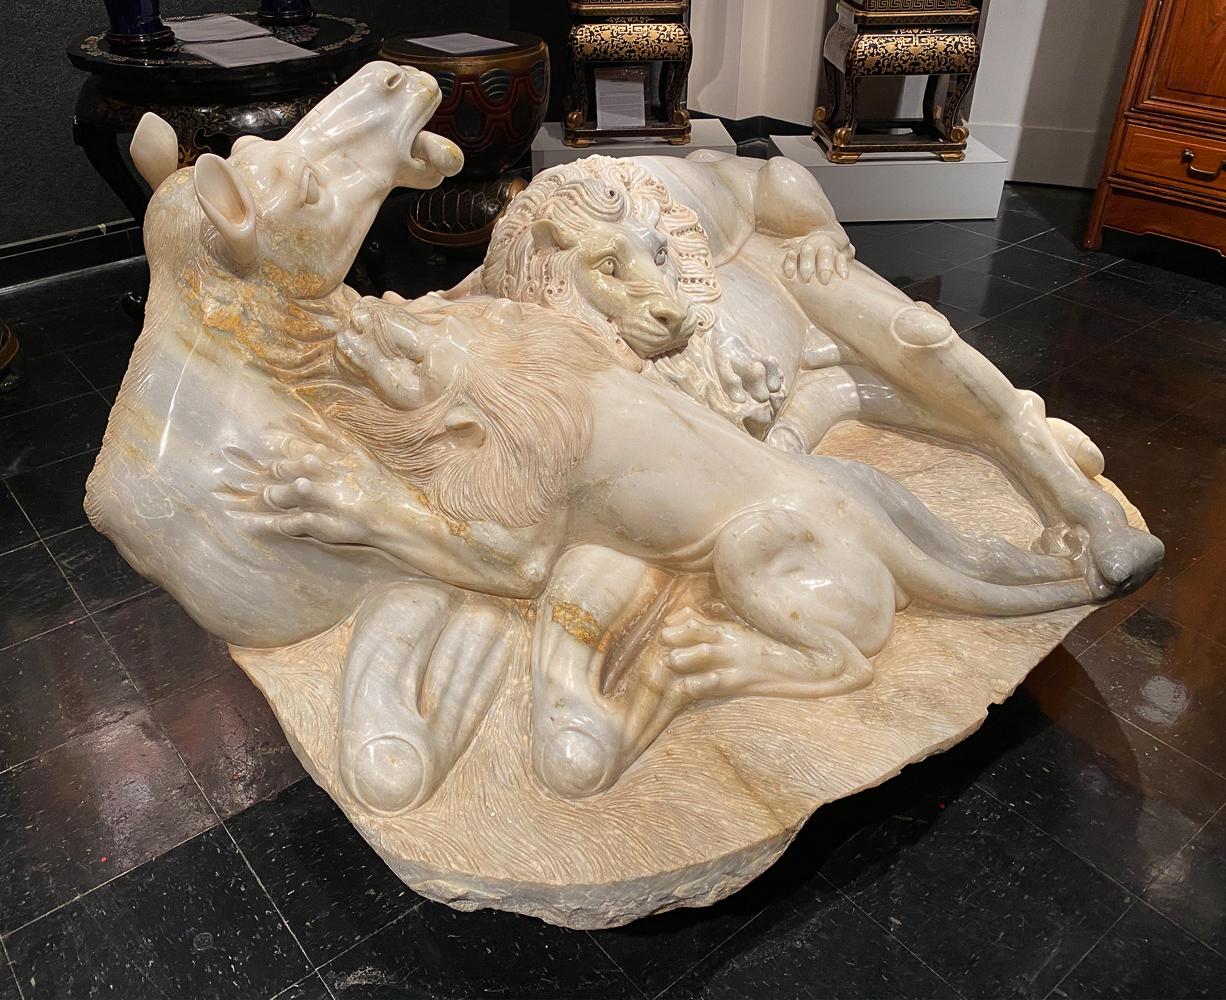 19th Century Monumental Carved White Marble Animalier Sculpture Group